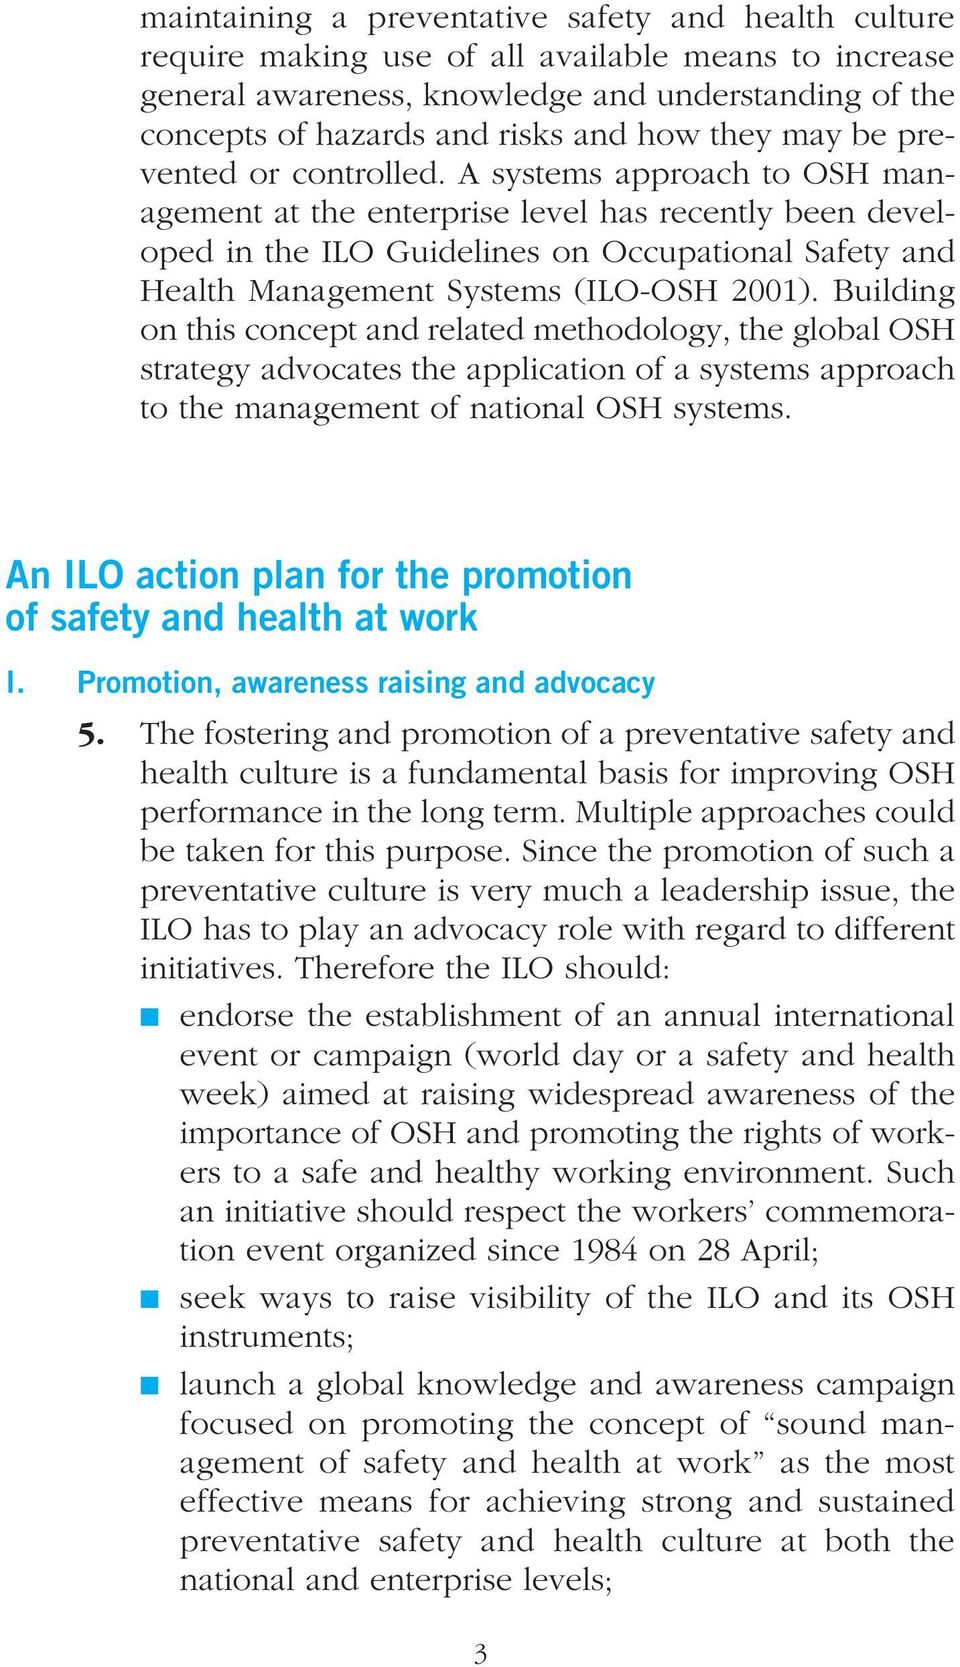 A systems approach to OSH management at the enterprise level has recently been developed in the ILO Guidelines on Occupational Safety and Health Management Systems (ILO-OSH 2001).